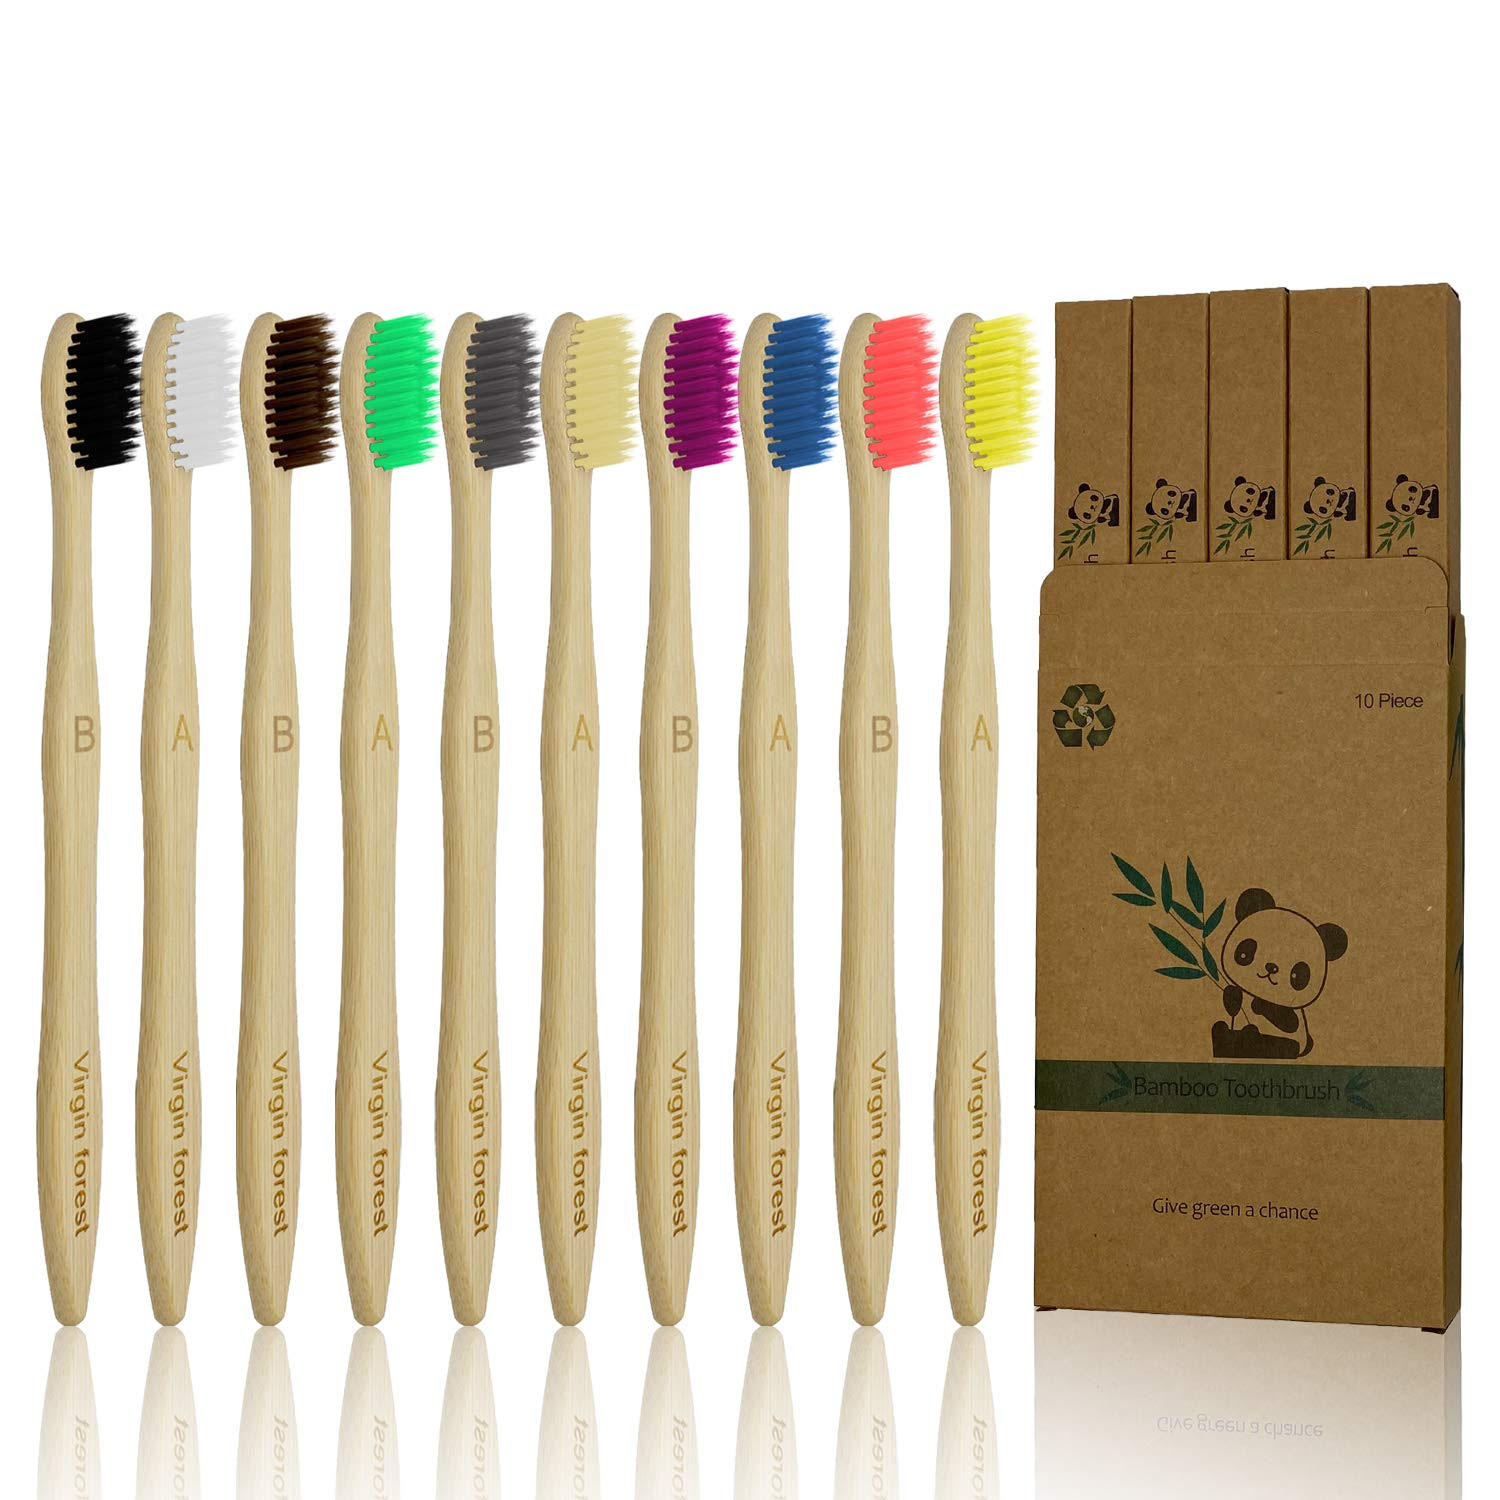 Image of 10 Pcs Soft Bristles Natural Bamboo Toothbrush, Biodegradable and Eco Friendly